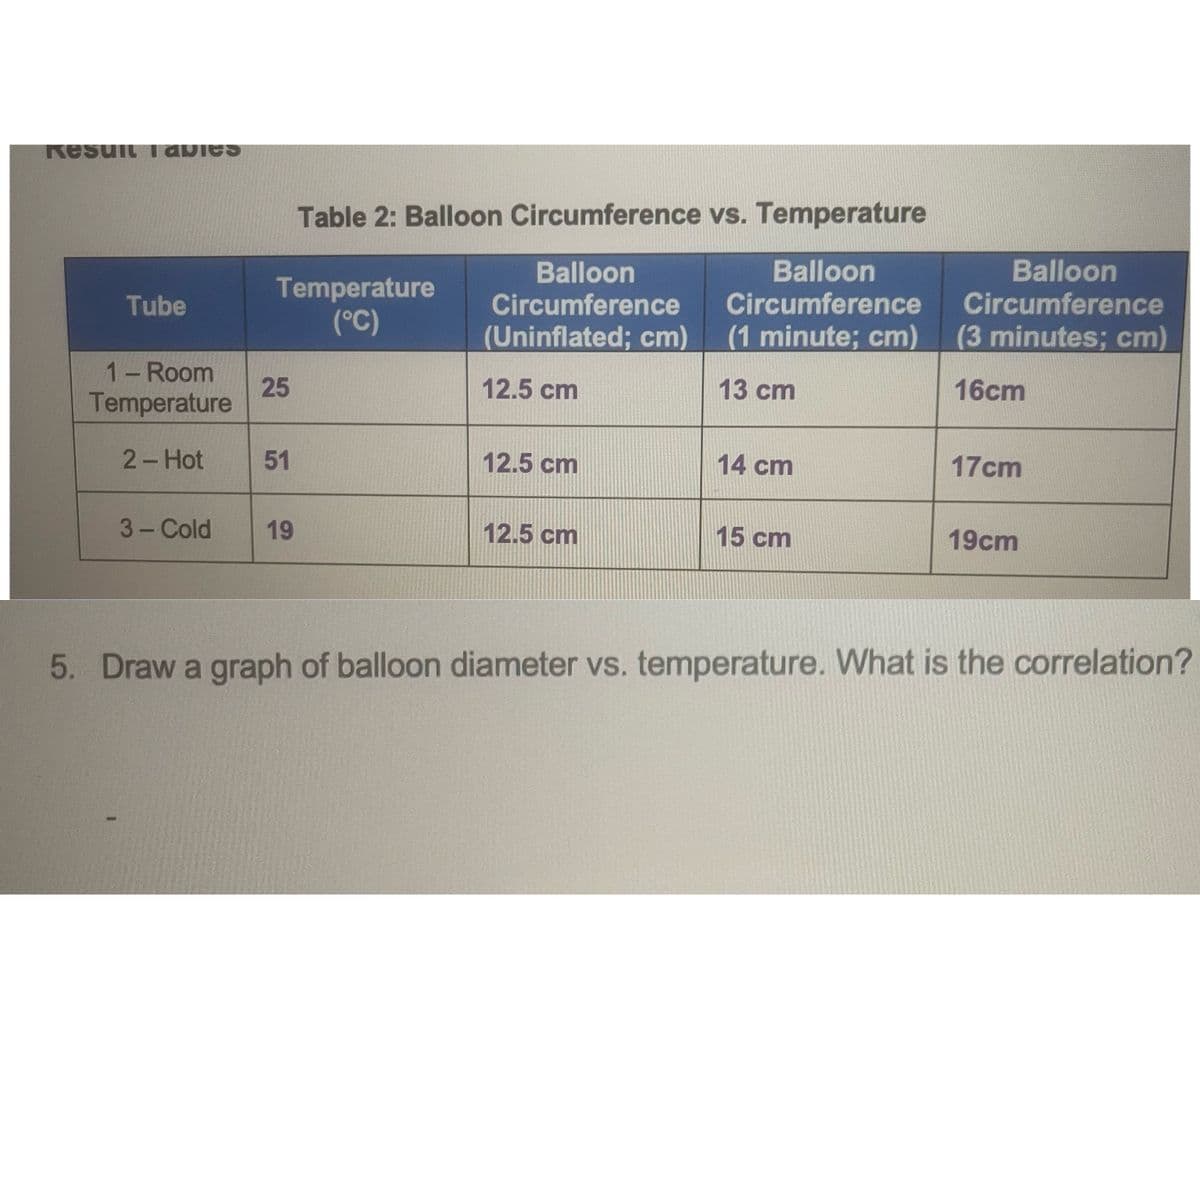 Resuit Tabies
Table 2: Balloon Circumference vs. Temperature
Balloon
Balloon
Circumference
Balloon
Temperature
(°C)
Circumference
(Uninflated; cm)
Tube
Circumference
(1minute; cm)
(3minutes; cm)
1- Room
25
12.5 cm
13 ст
16cm
Temperature
2- Hot
51
12.5 cm
14 cm
17cm
3 Cold
19
12.5 ст
15 cm
19cm
5. Draw a graph of balloon diameter vs. temperature. What is the correlation?
